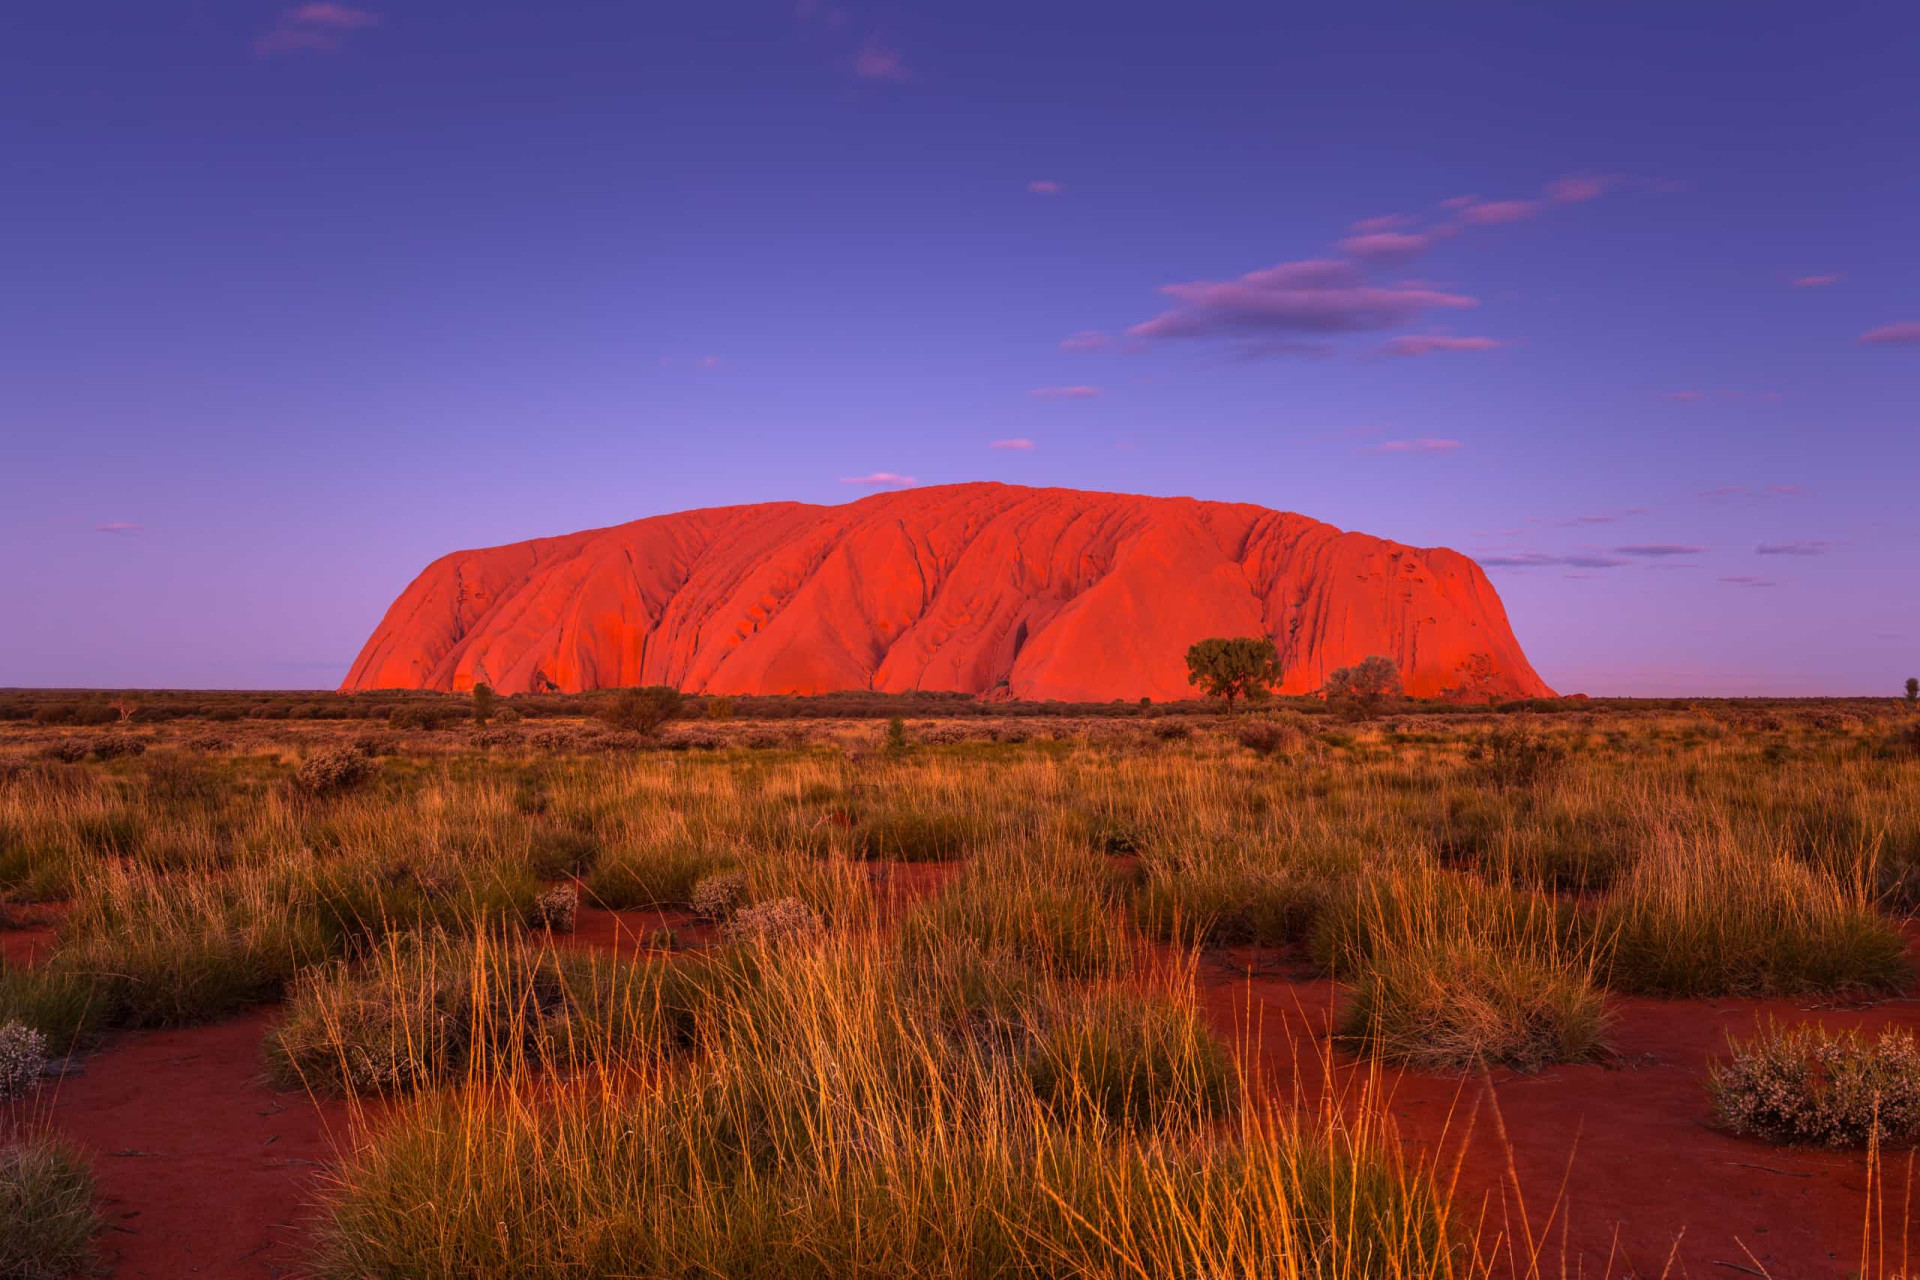 <p>In October 2019, after years of ignoring repeated warnings not to do so (and upsetting the Indigenous population to make matters worse), tourists were finally banned from climbing <a href="https://www.starsinsider.com/travel/407868/uluru-the-mysteries-of-the-mystical-australian-mountain" rel="noopener">Uluru</a>, formally known as Ayers Rock.</p><p><a href="https://www.msn.com/en-my/community/channel/vid-7xx8mnucu55yw63we9va2gwr7uihbxwc68fxqp25x6tg4ftibpra?cvid=94631541bc0f4f89bfd59158d696ad7e">Follow us and access great exclusive content every day</a></p>